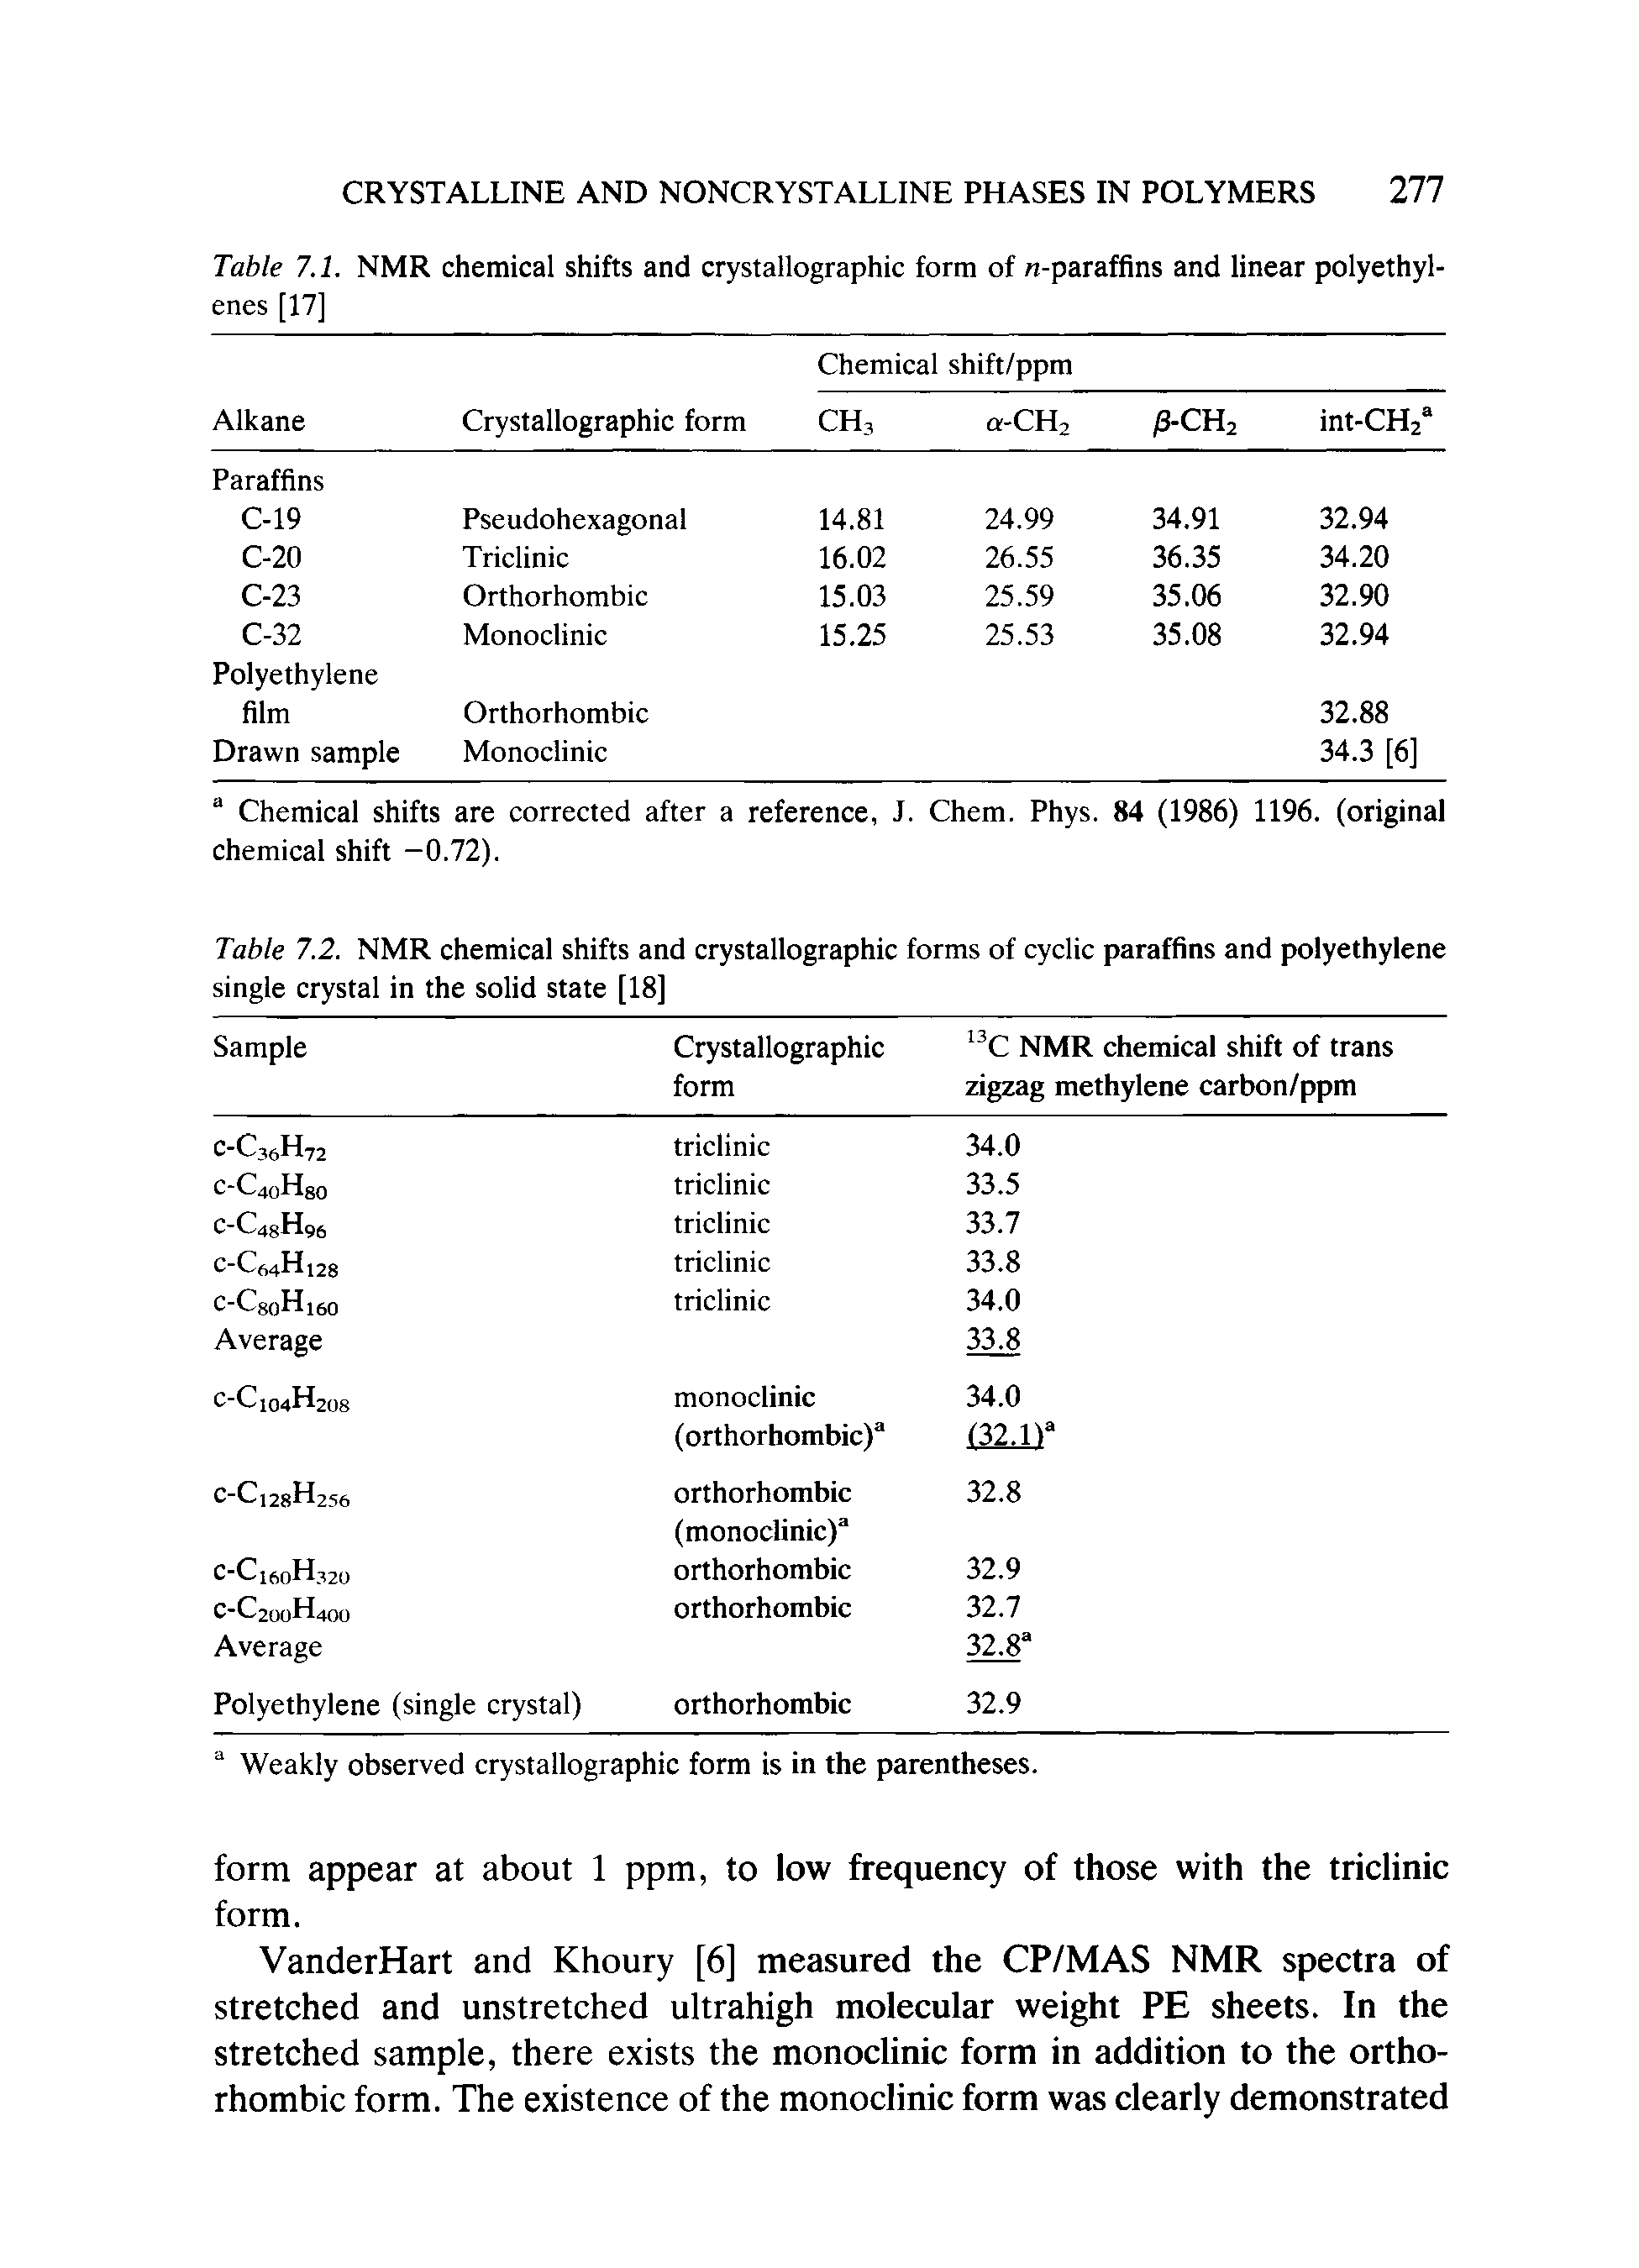 Table 7.2. NMR chemical shifts and crystallographic forms of cyclic paraffins and polyethylene single crystal in the solid state [18]...